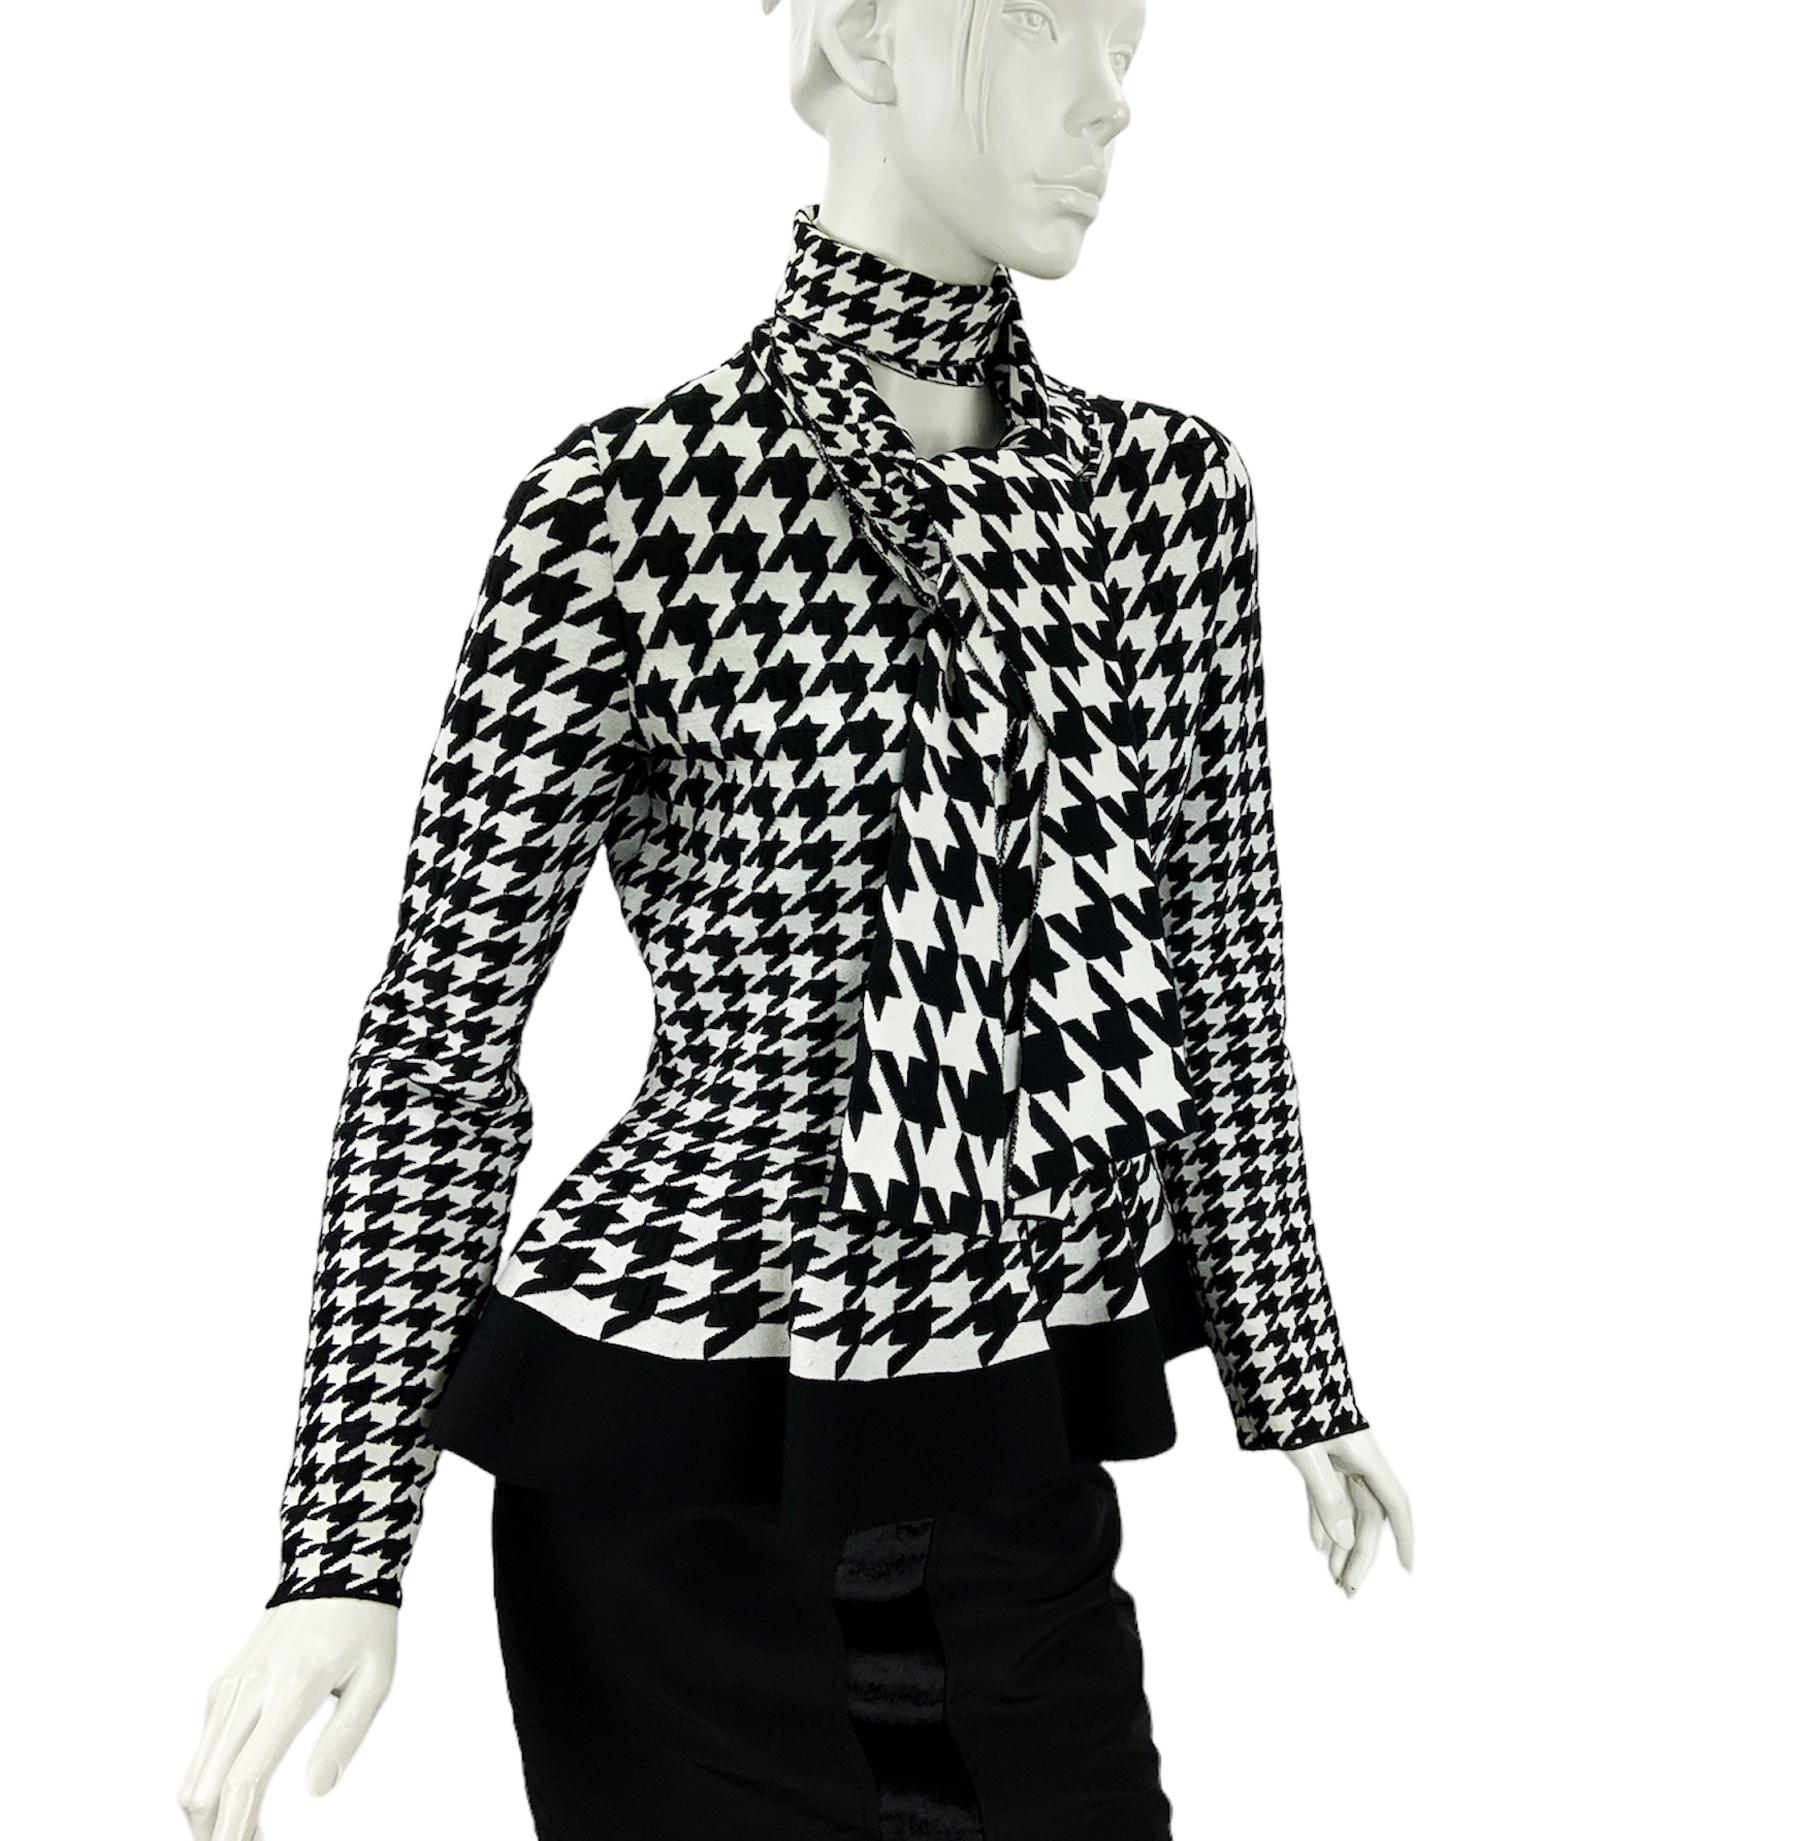 Alexander Mcqueen Tie-neck Houndstooth Patterned Knit Top Cardigan size L In Excellent Condition For Sale In Montgomery, TX